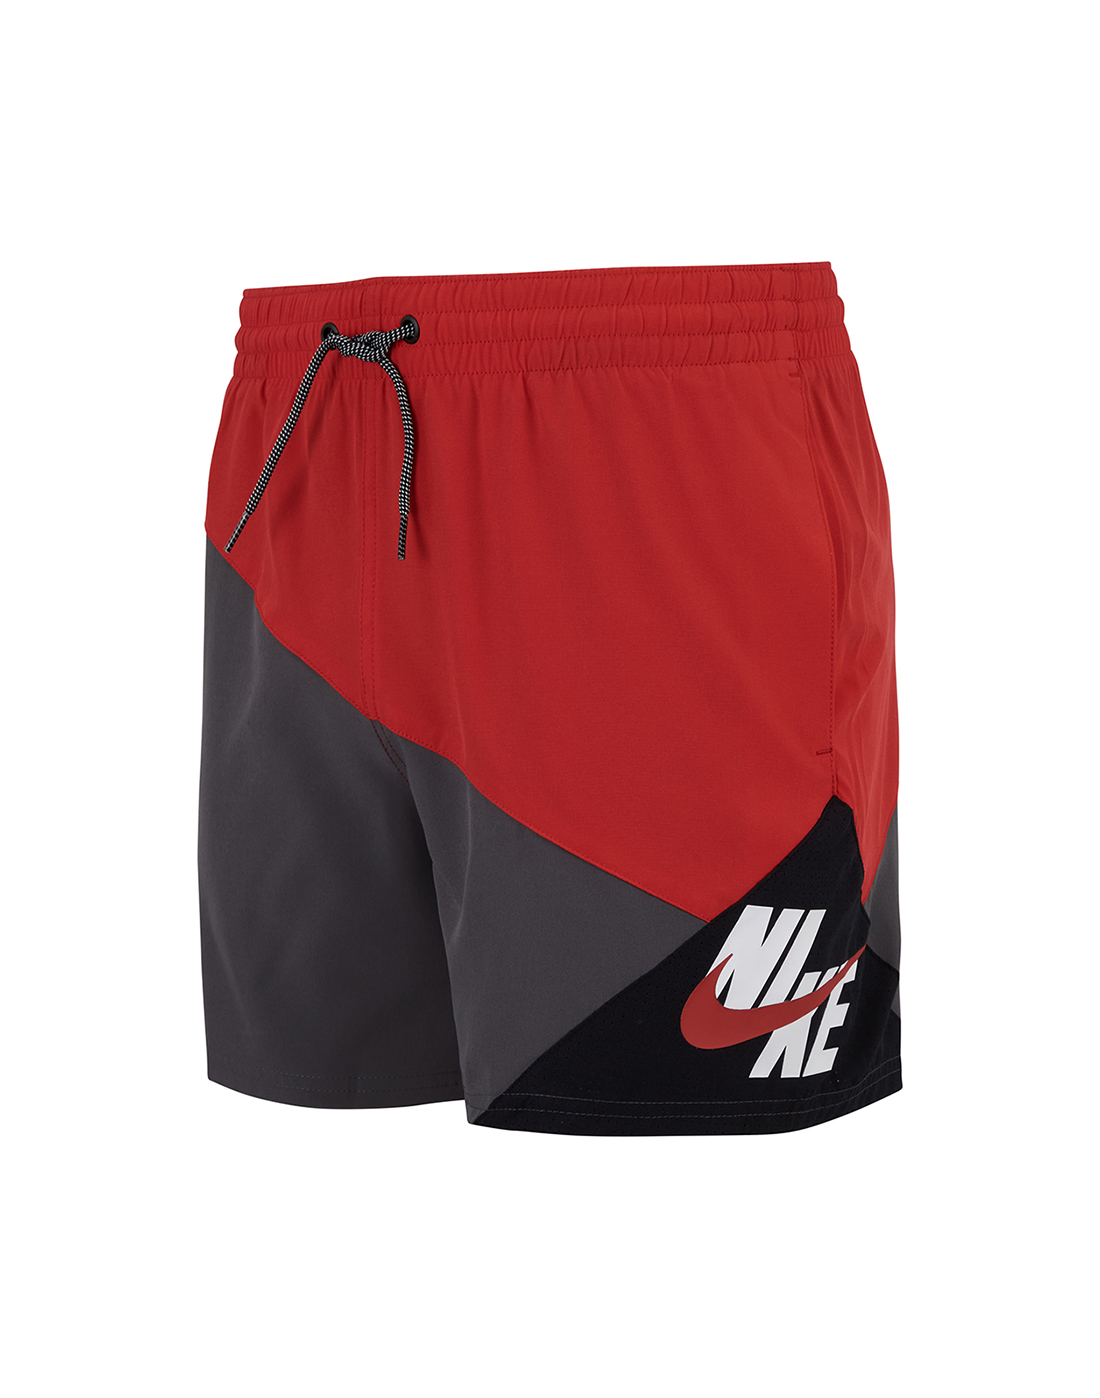 Nike Mens 5 Inch Logo Shorts - Red | Life Style Sports IE